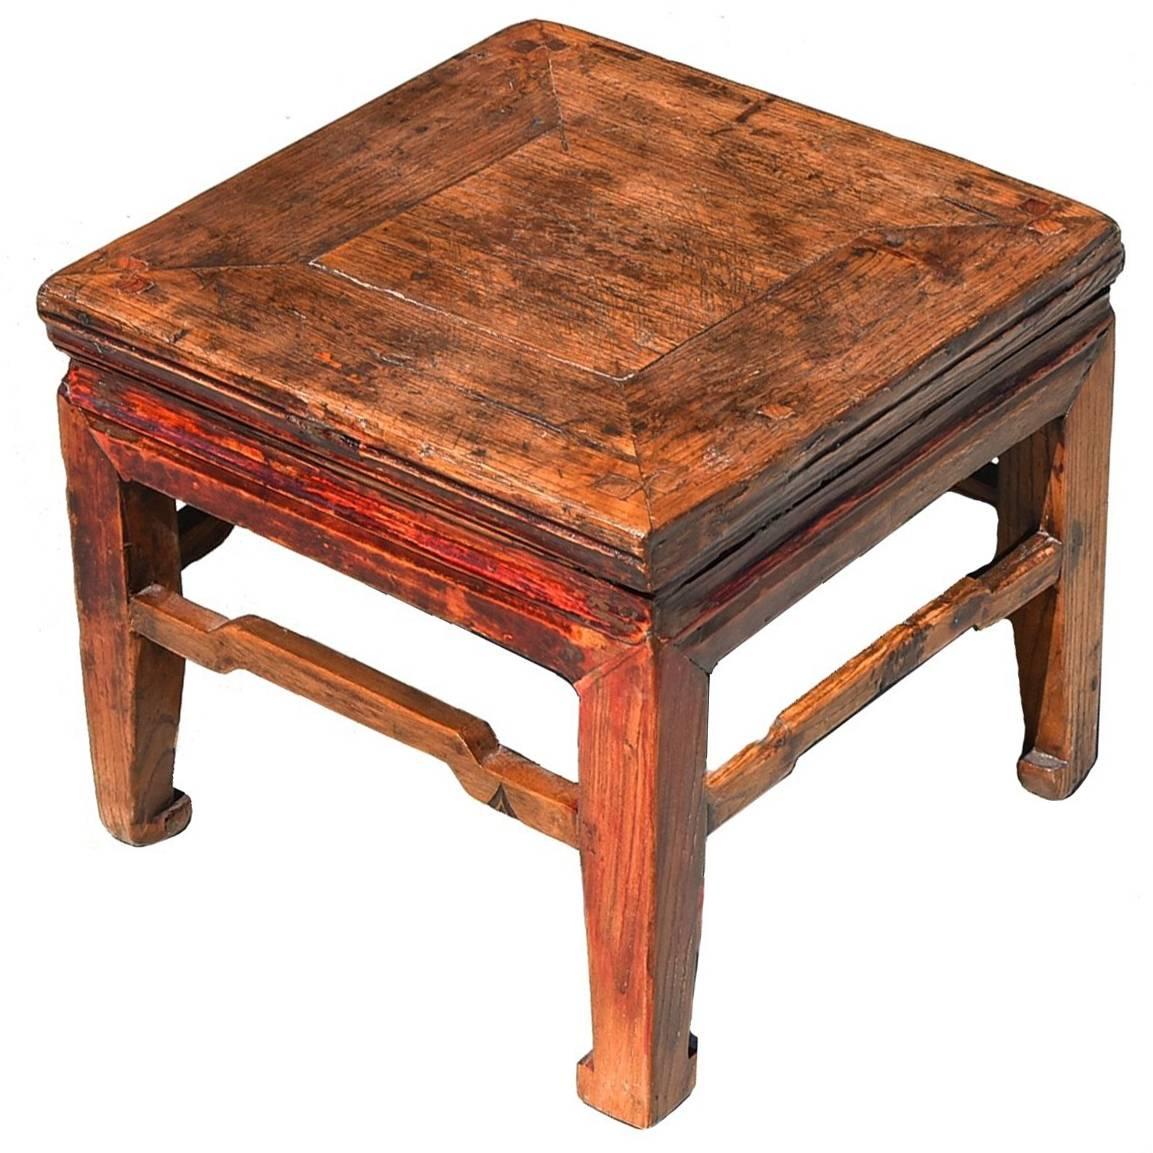 Square Antique Country Stool, with Hoof Legs